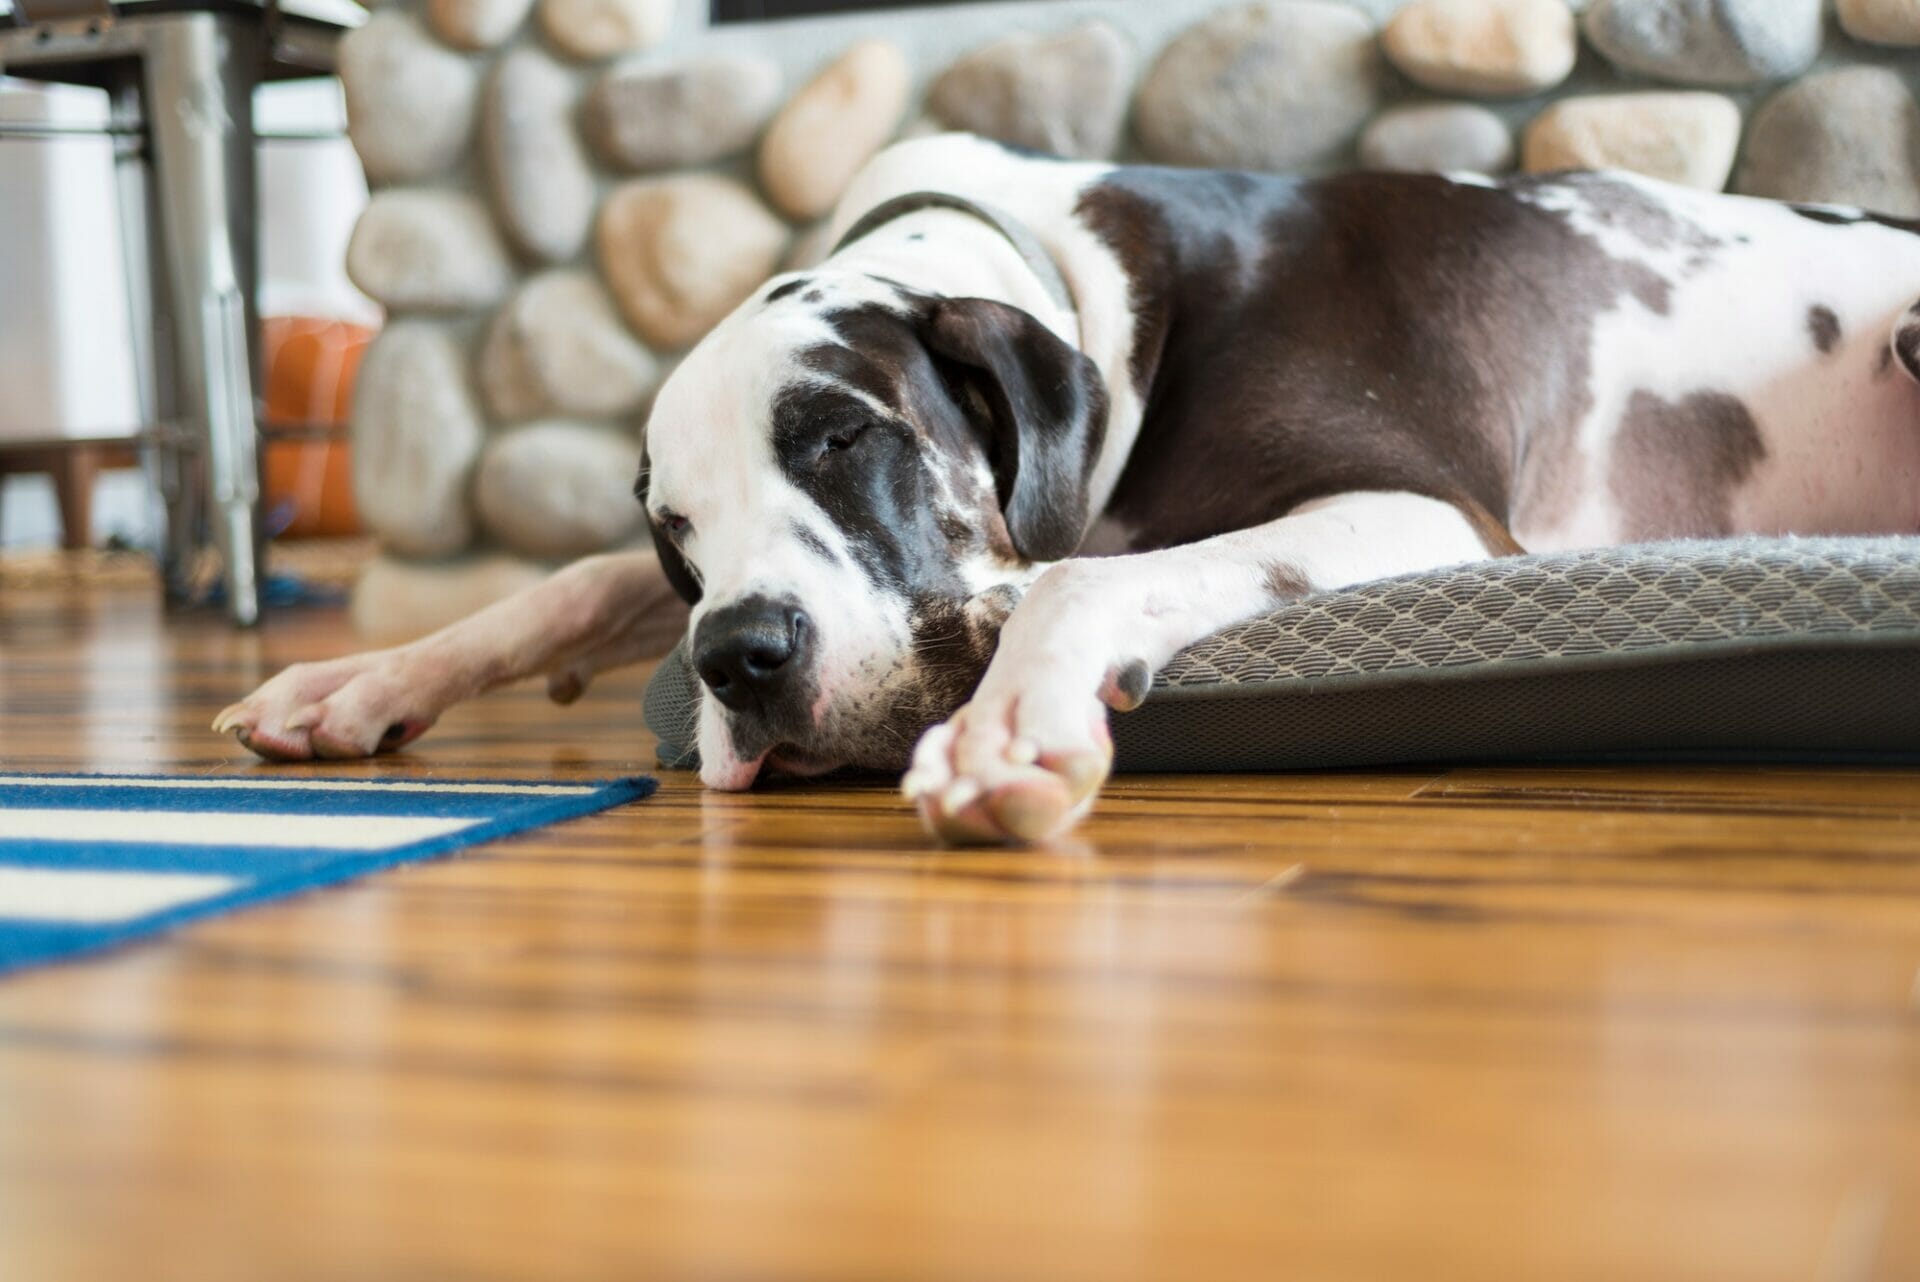 Dog napping on pet bed over hard wood flooring